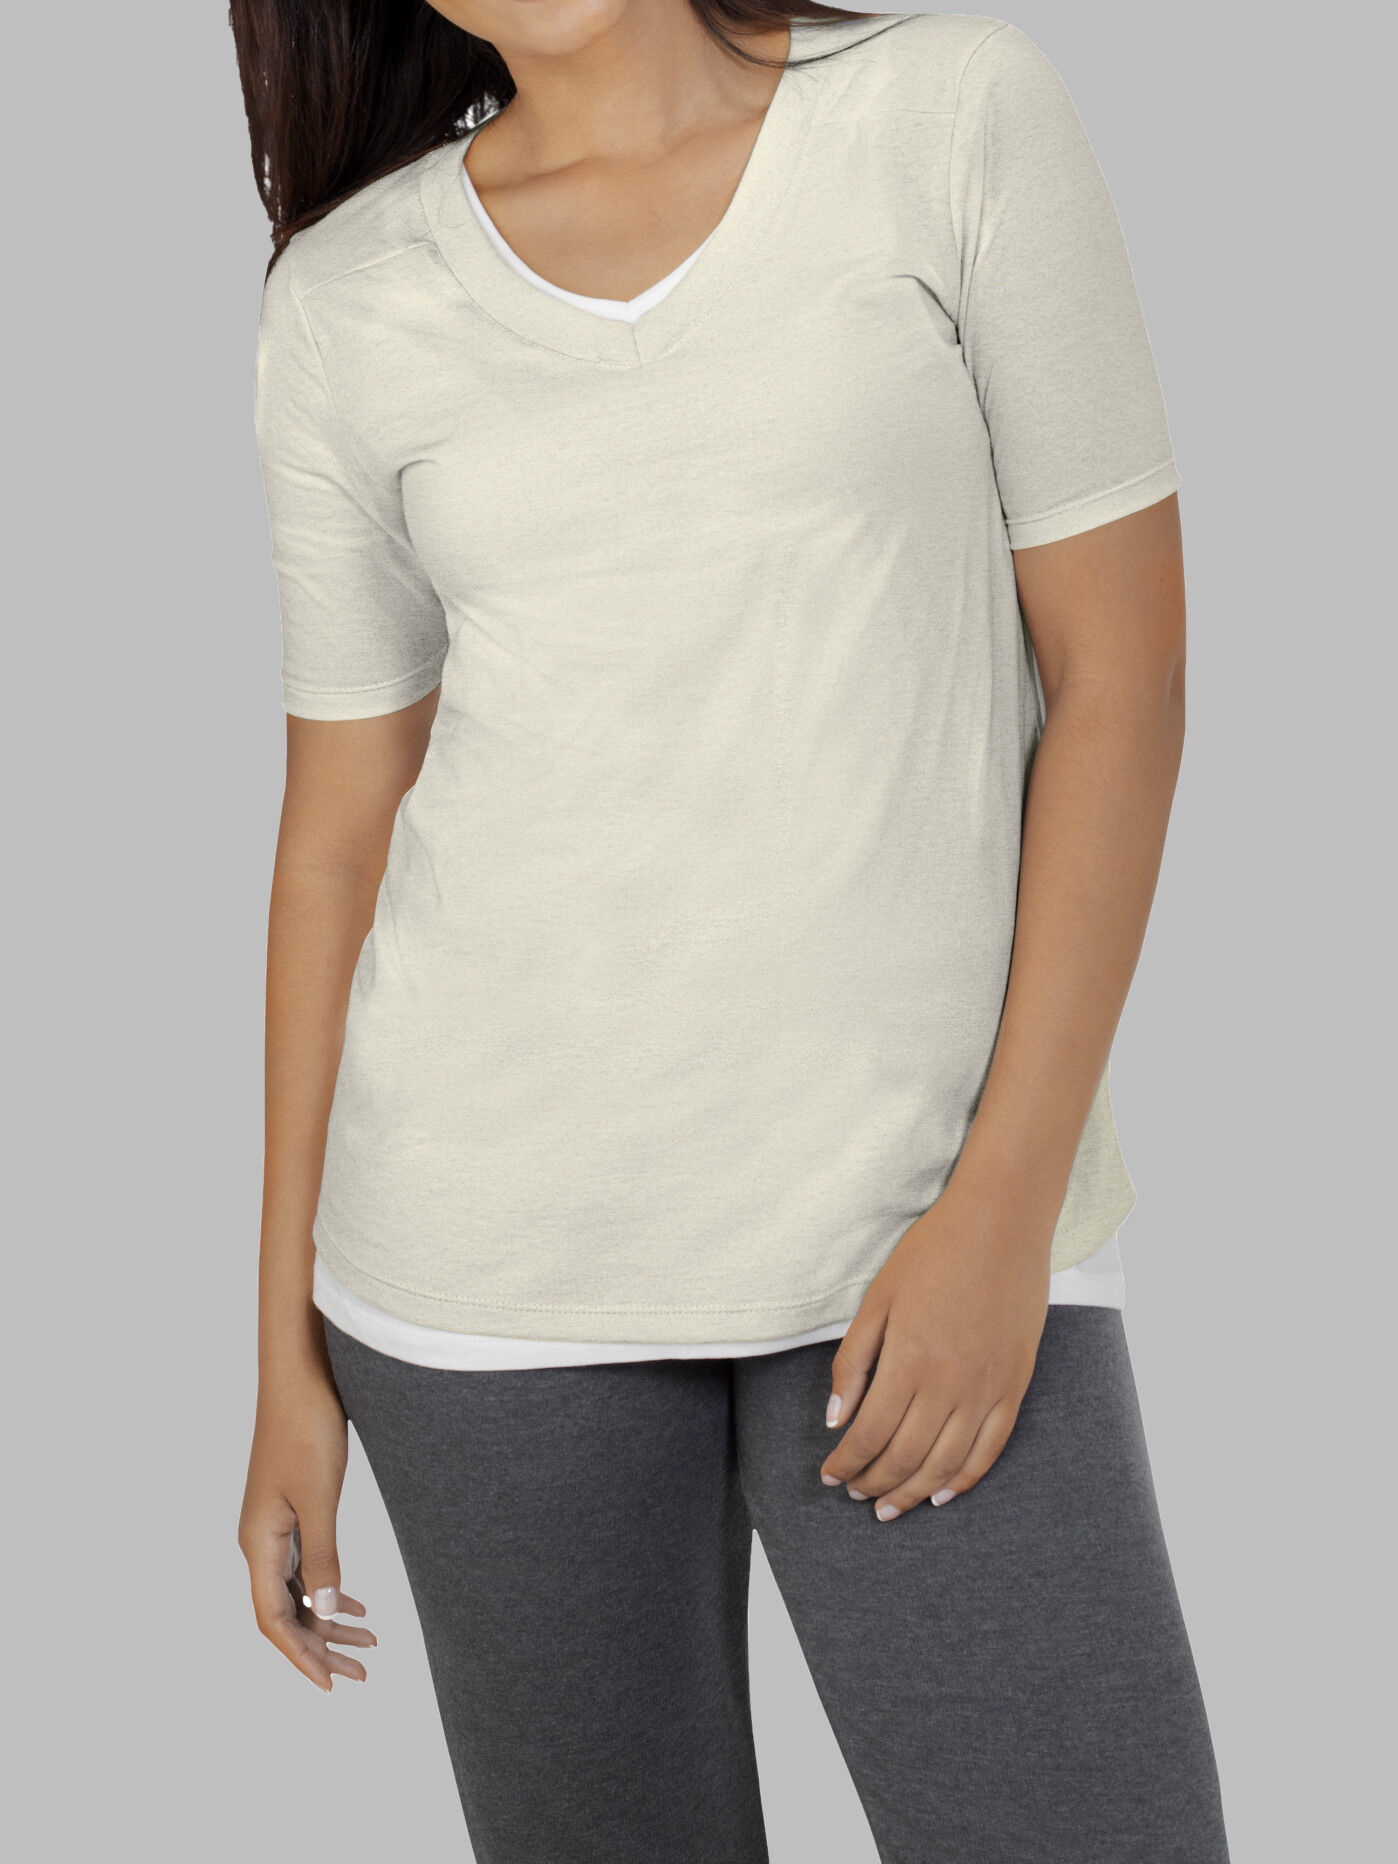 Women's T-shirts | Fruit of the Loom Tees and T-Shirts